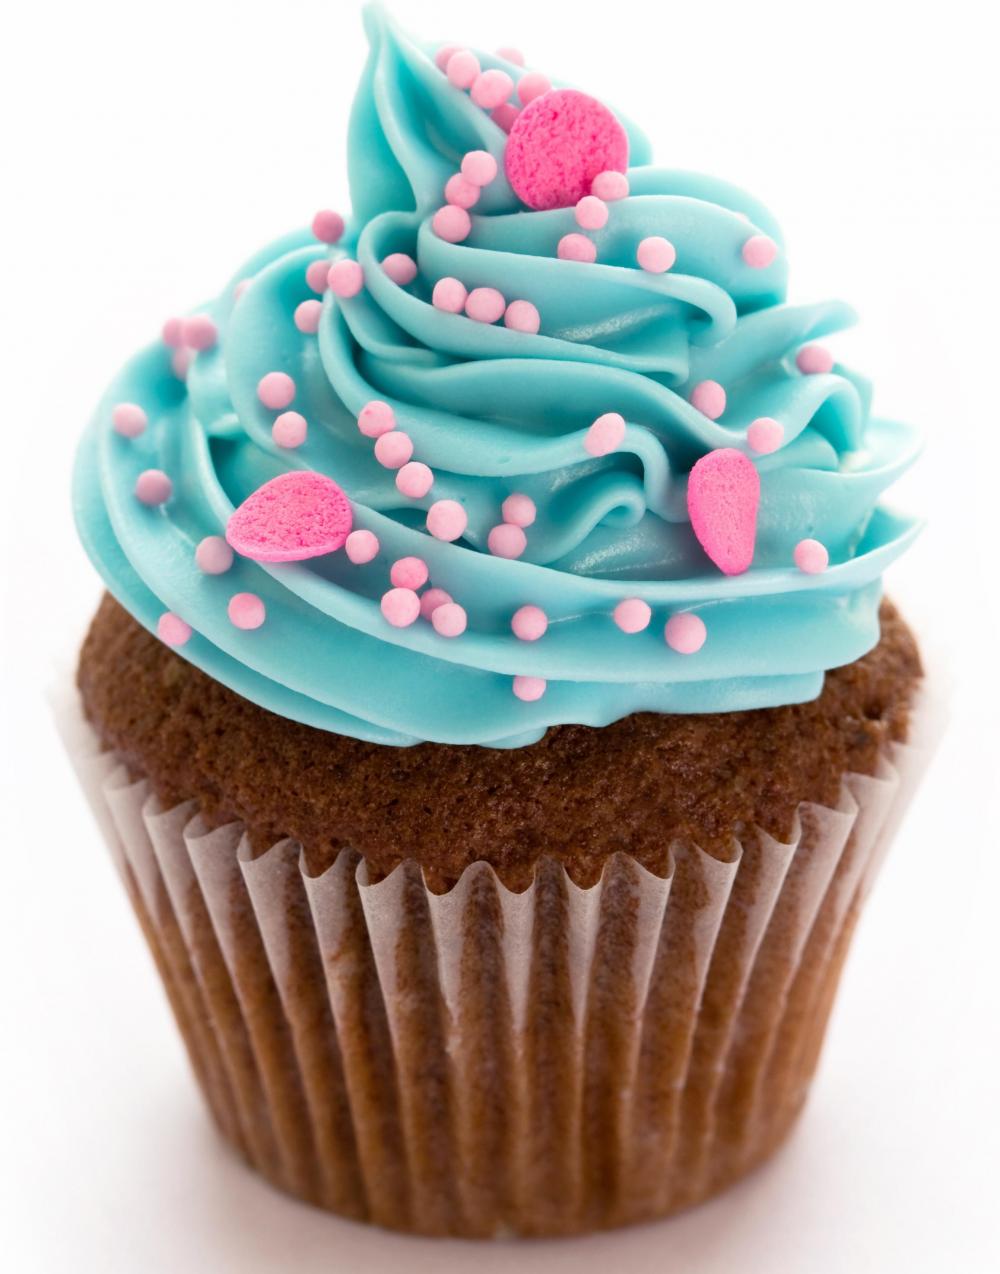 Amazing Cupcake Pictures & Backgrounds